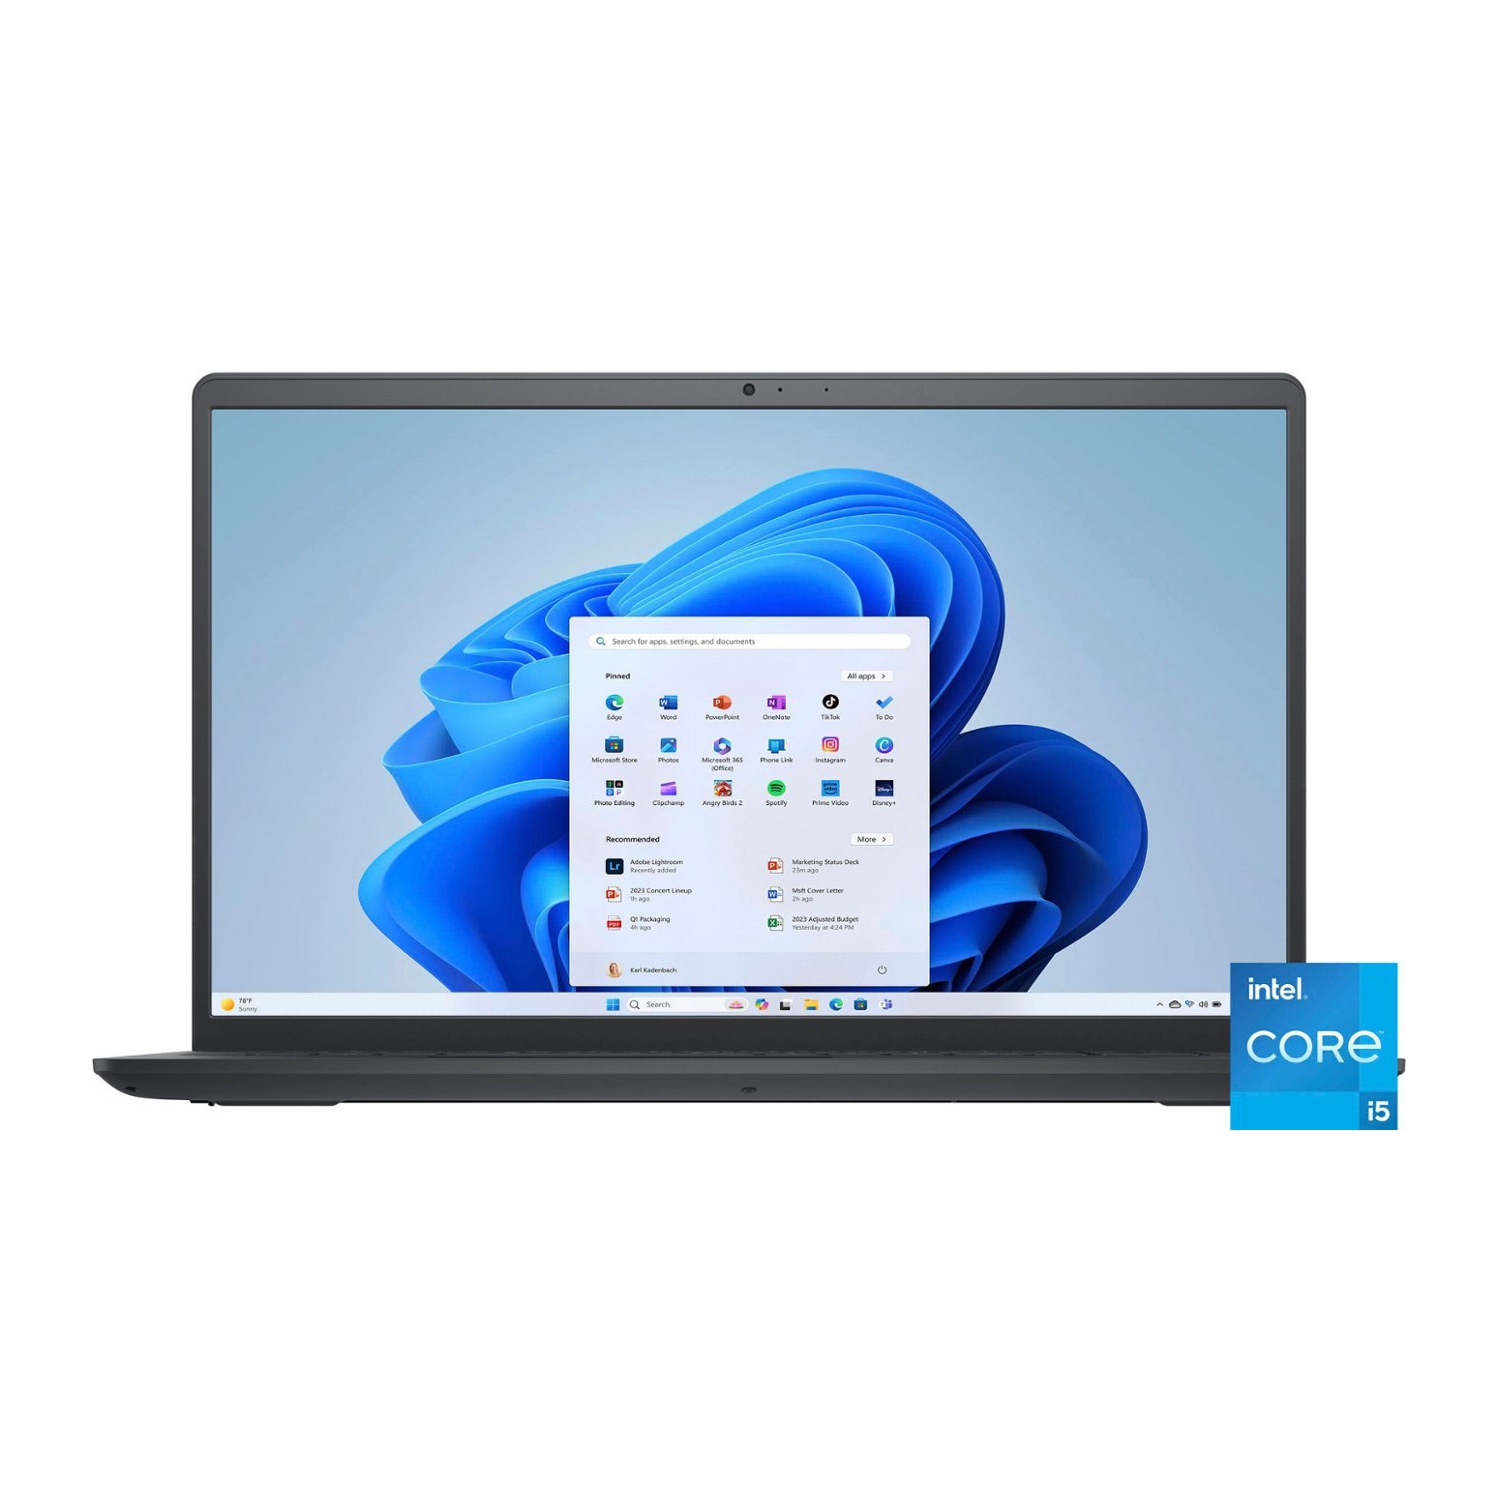 Dell - Inspiron 15.6" 3520 FHD 1920 x 1080 Touch Screen Laptop - Intel Core i5 - 16GB Memory - 512GB SSD PCIE - Carbon Black - Windows 11 Home S mode